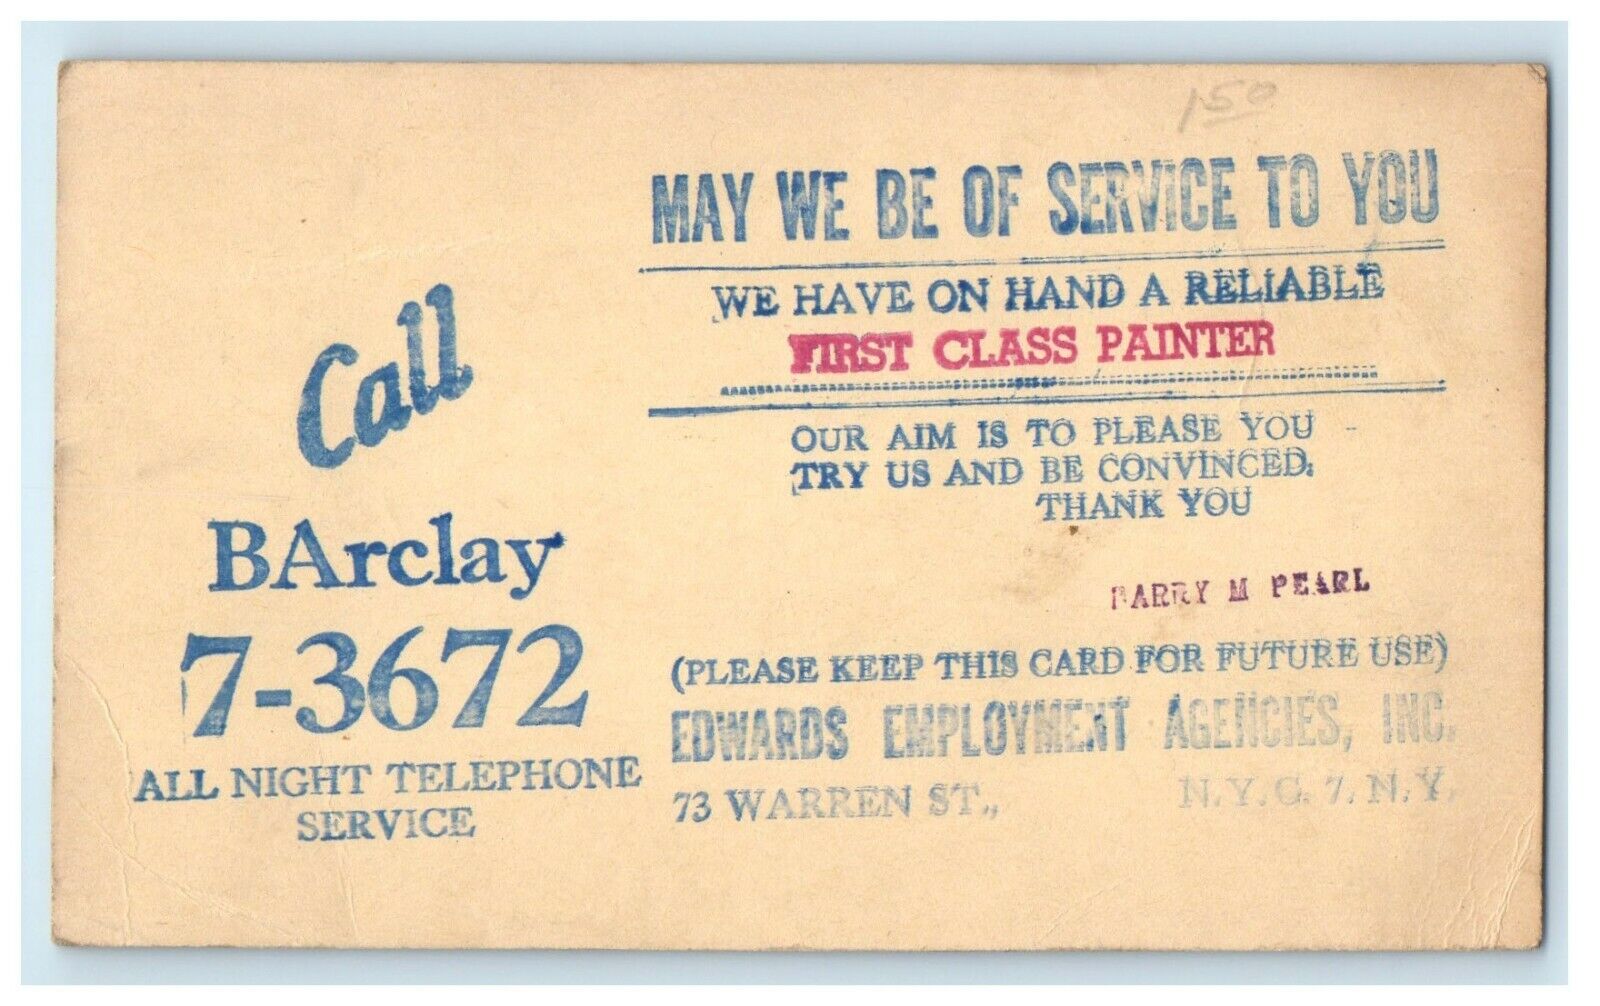 First Class Painter Edwards Employment Agencies Bronx NY Advertising Postcard